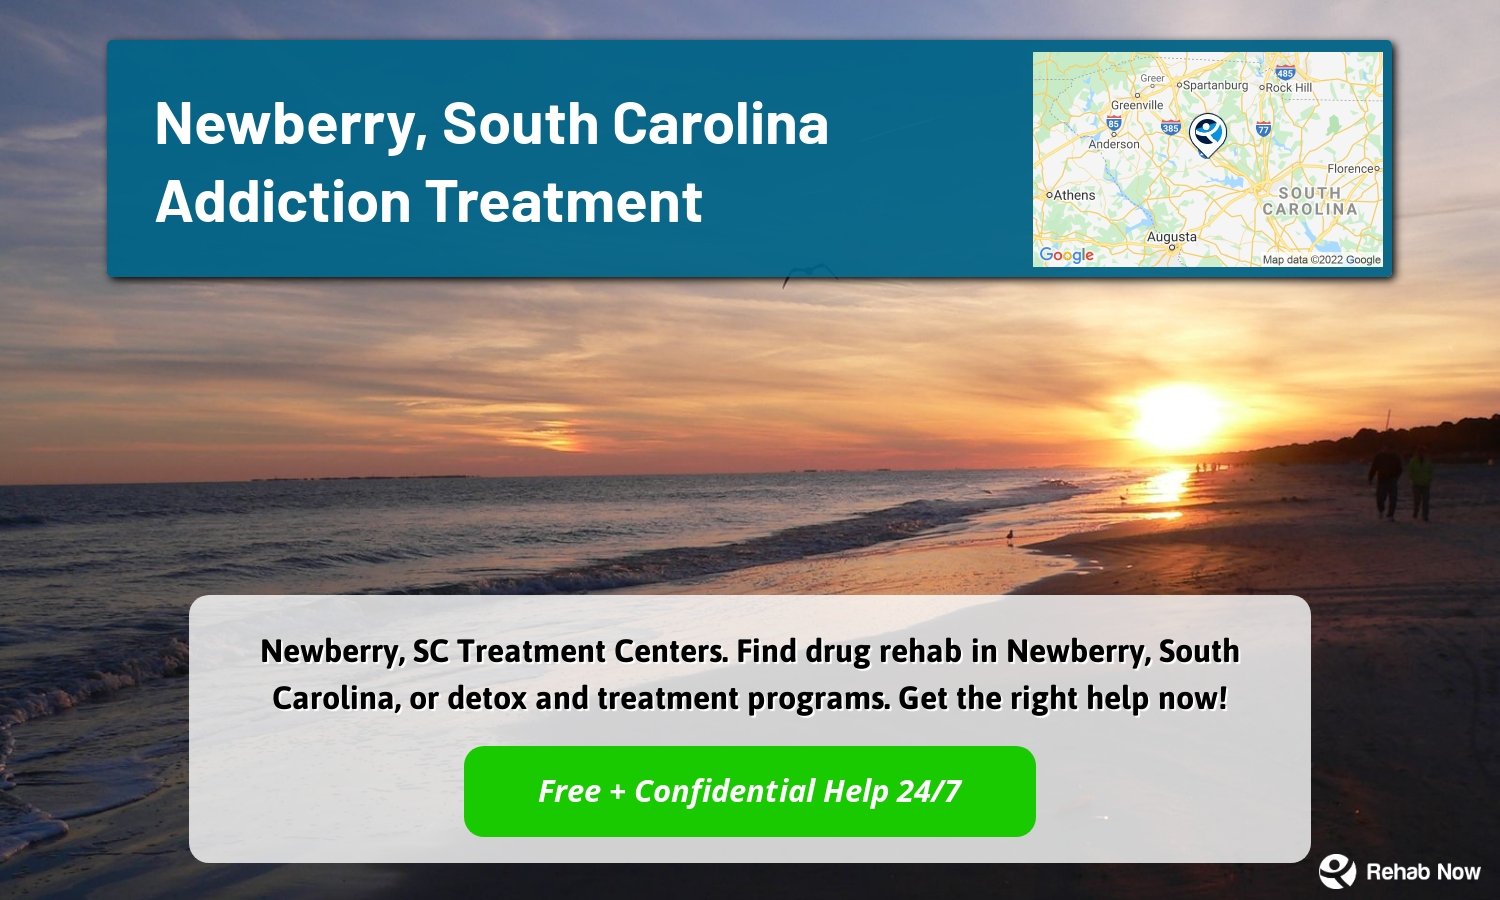 Newberry, SC Treatment Centers. Find drug rehab in Newberry, South Carolina, or detox and treatment programs. Get the right help now!